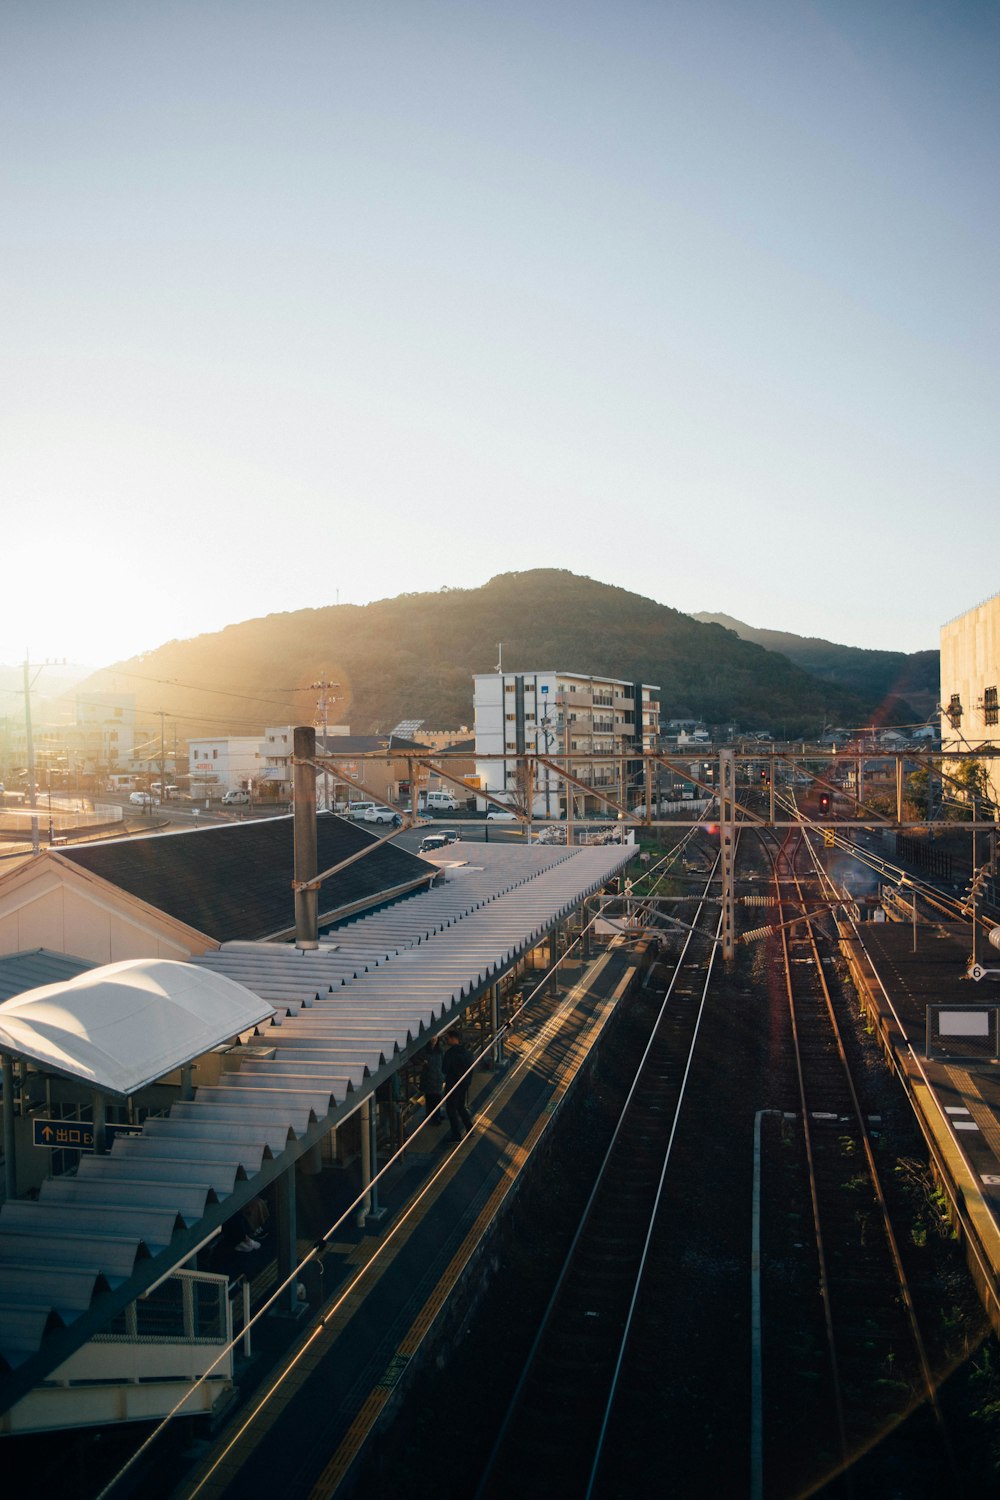 a view of a train station with a mountain in the background